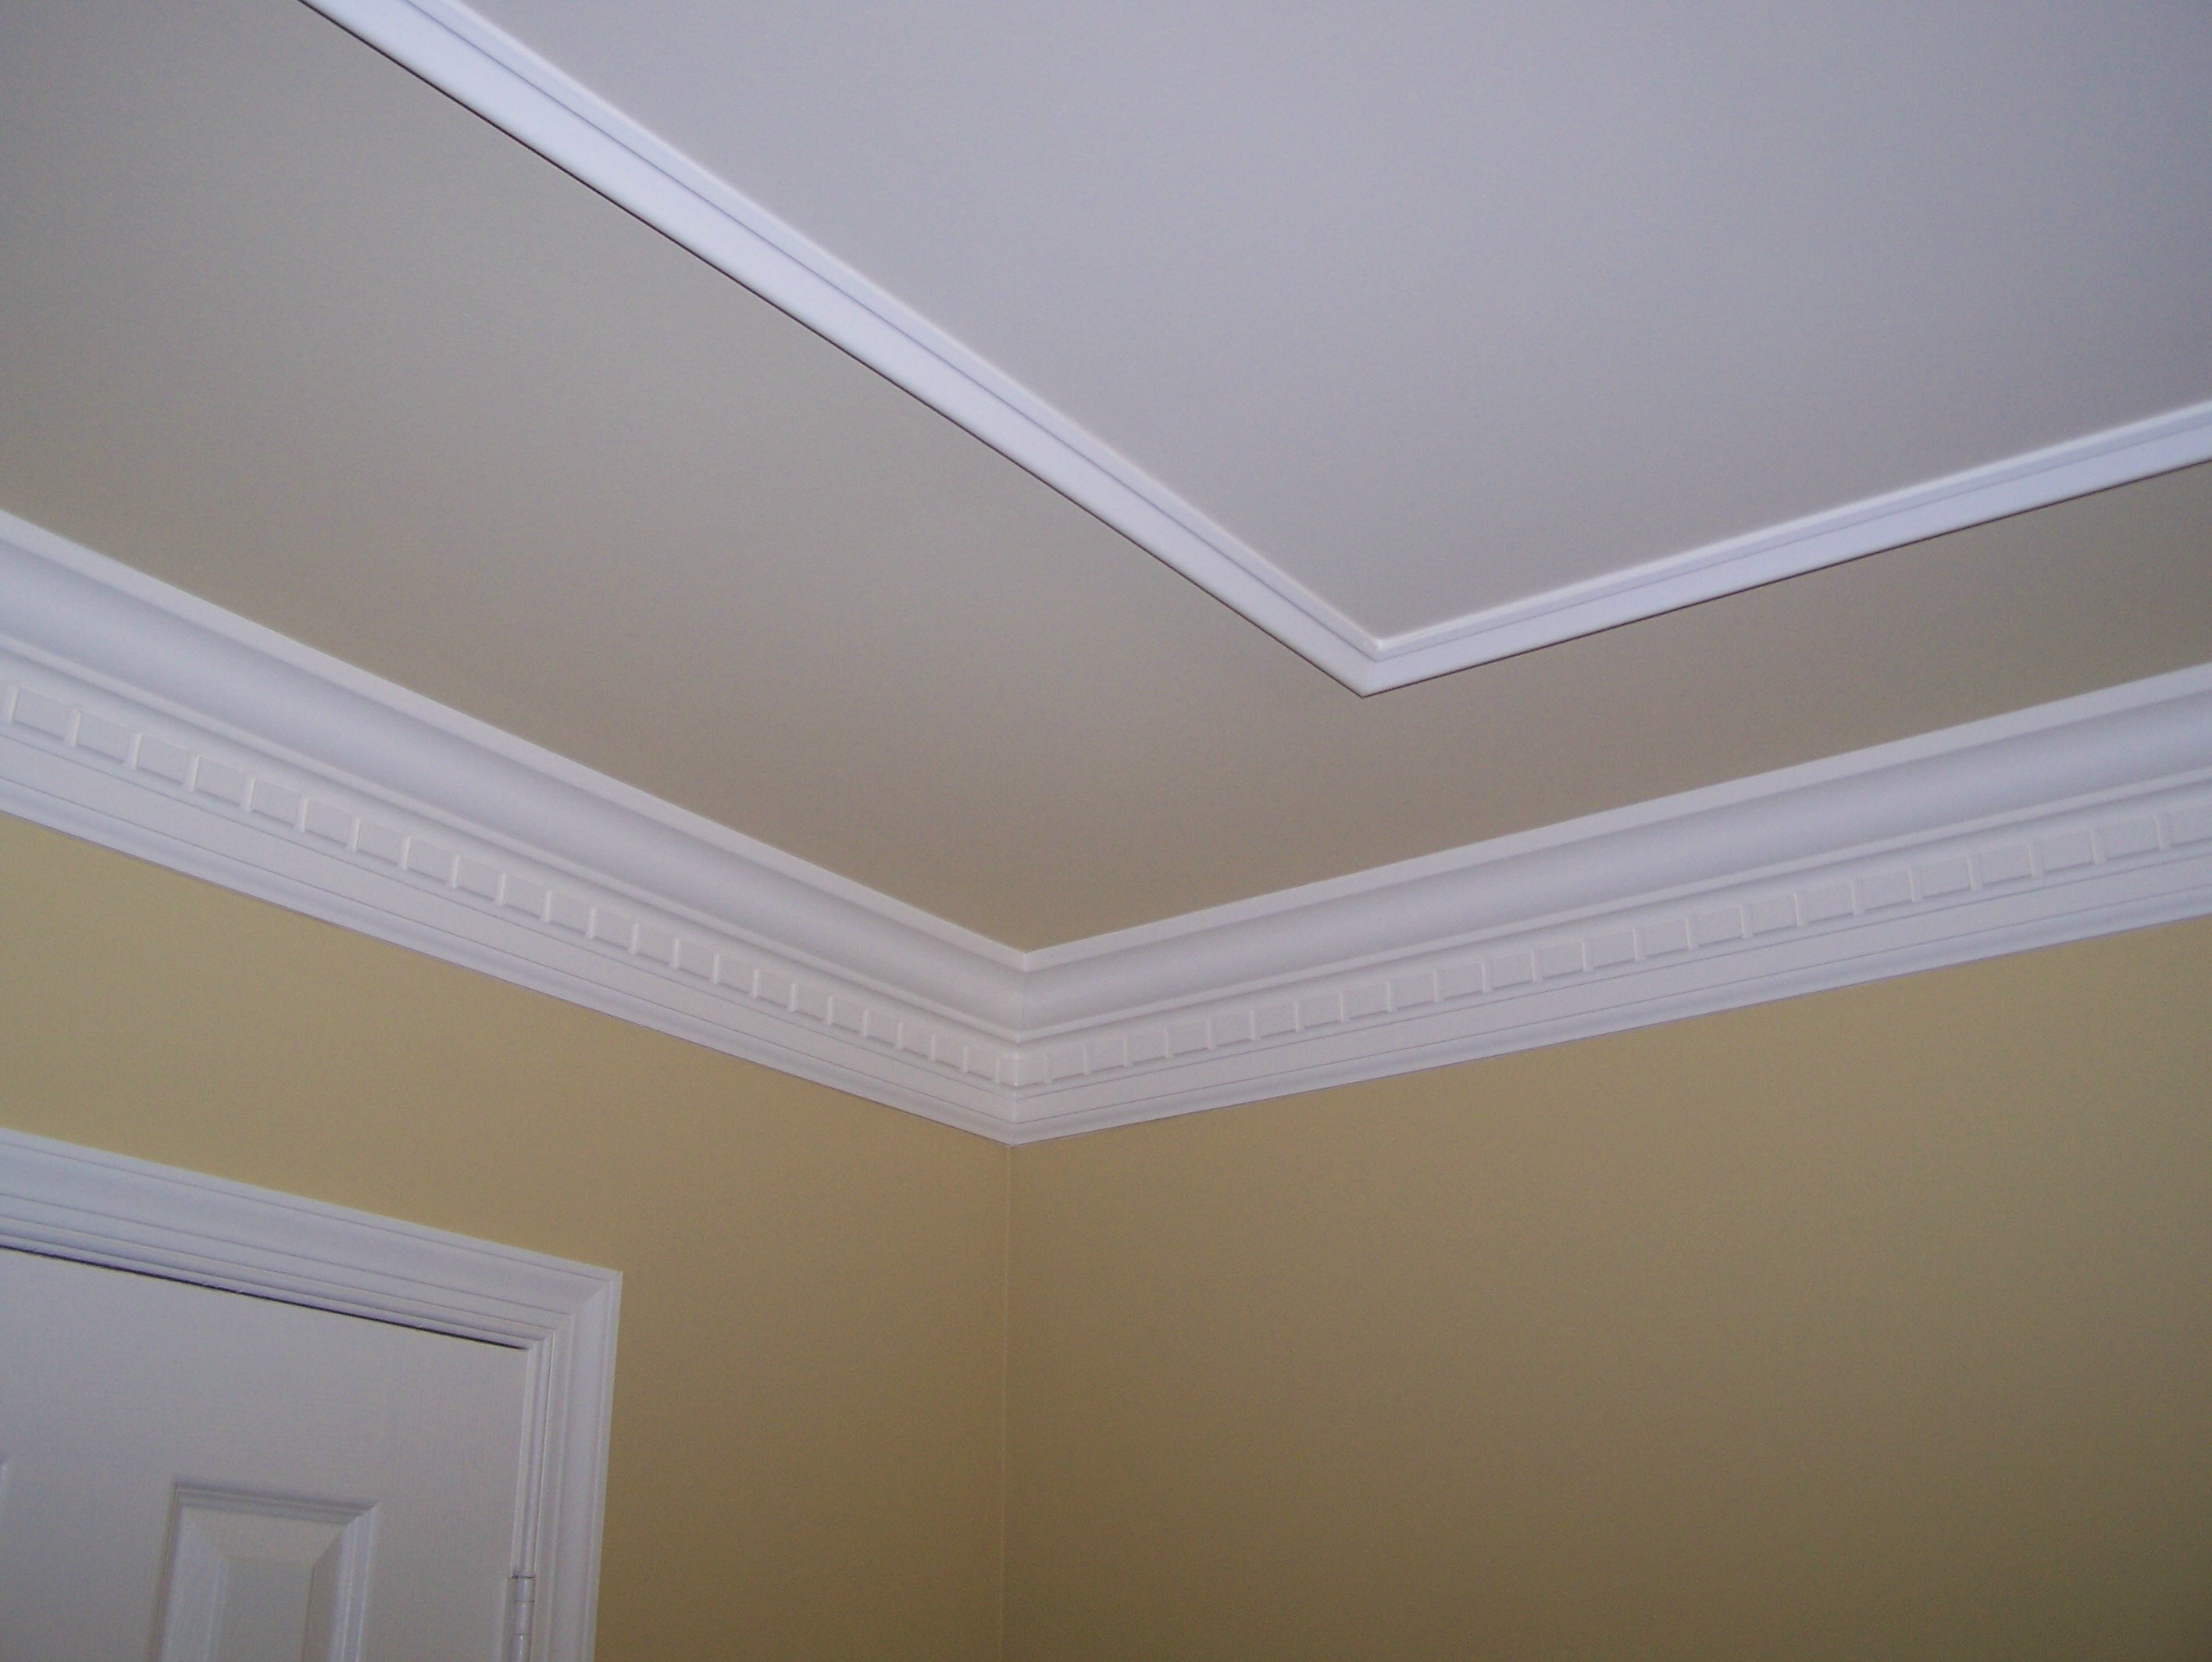 roof ceiling colour design image bedroom ceiling - Home Wall Decoration